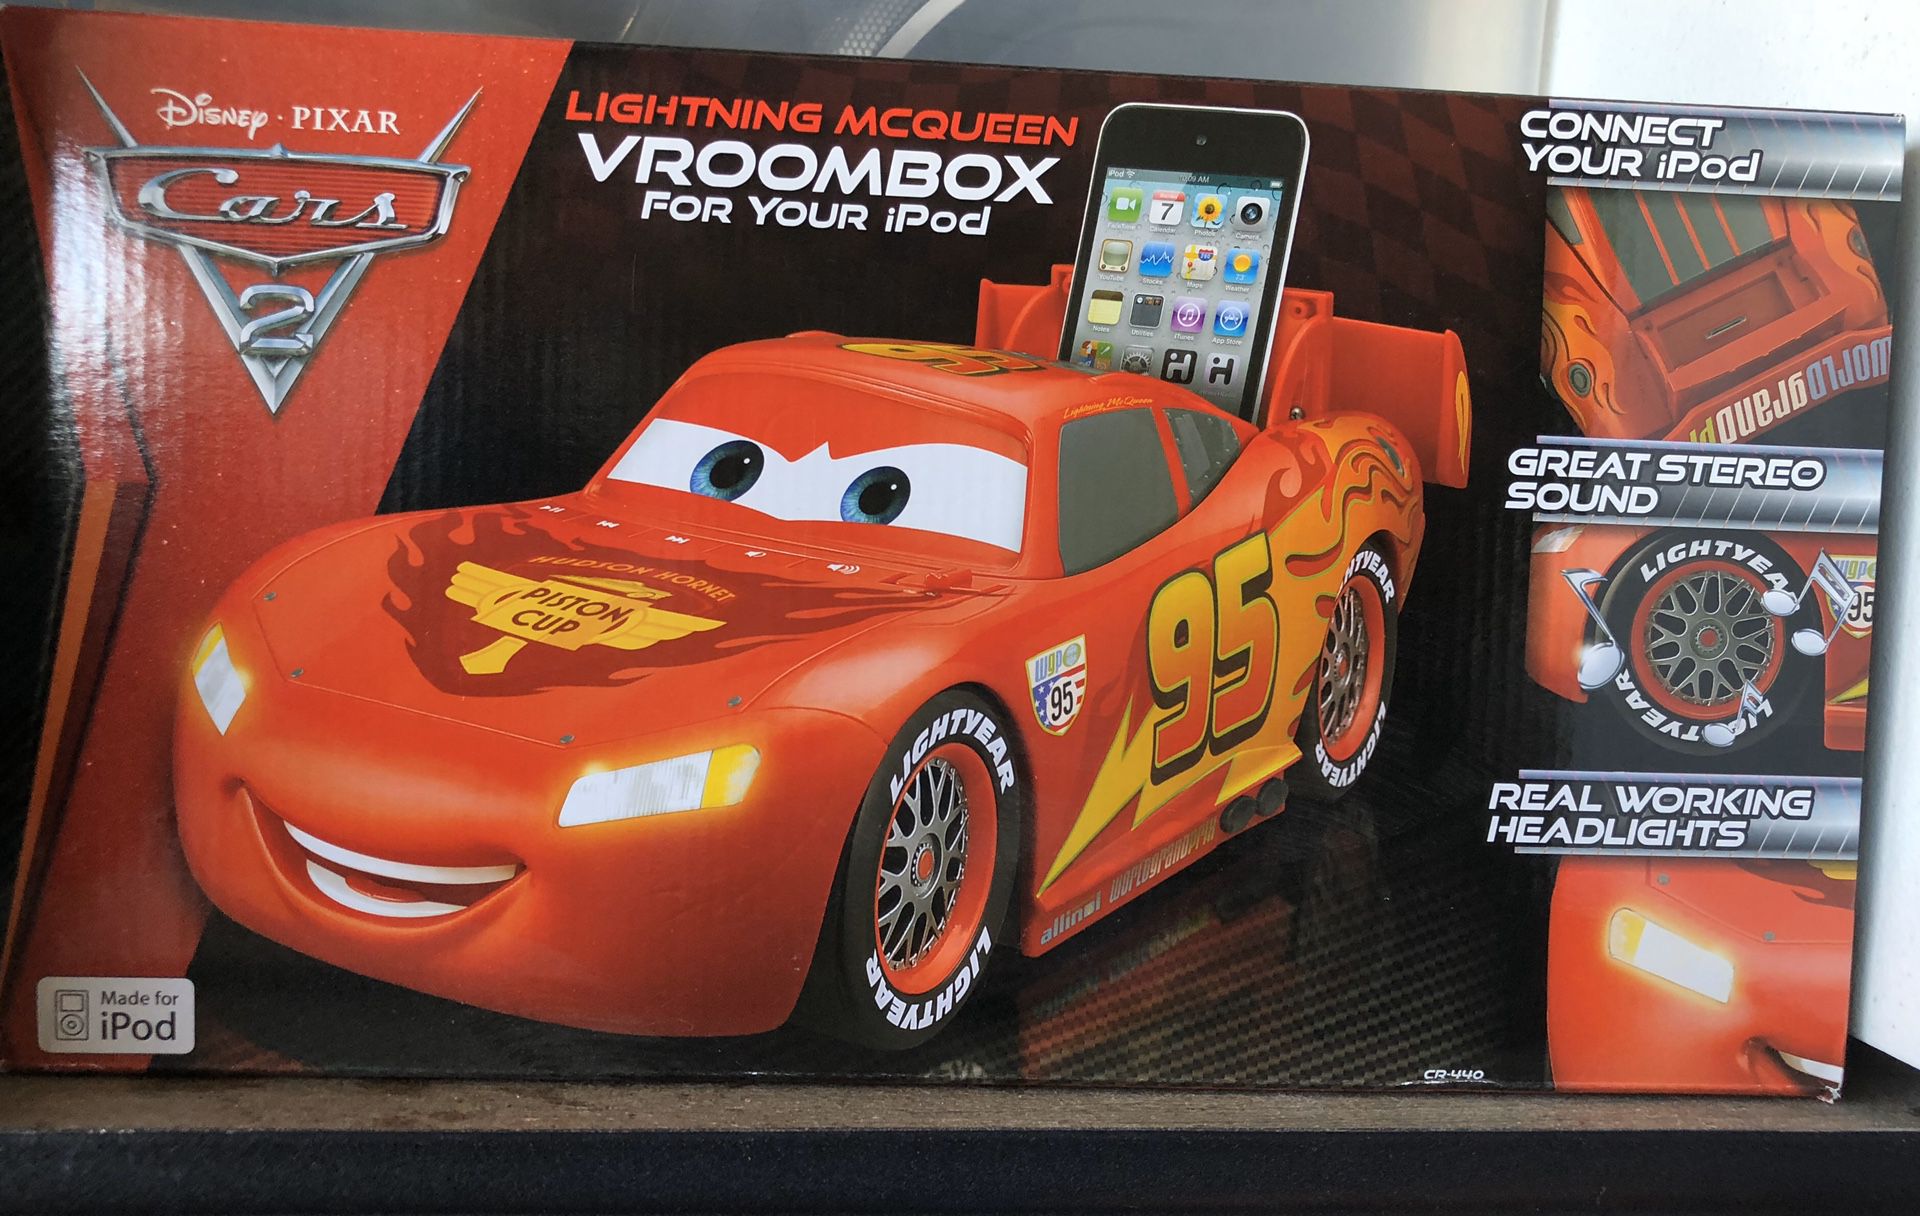 Lightning McQueen vroombox for your iPod